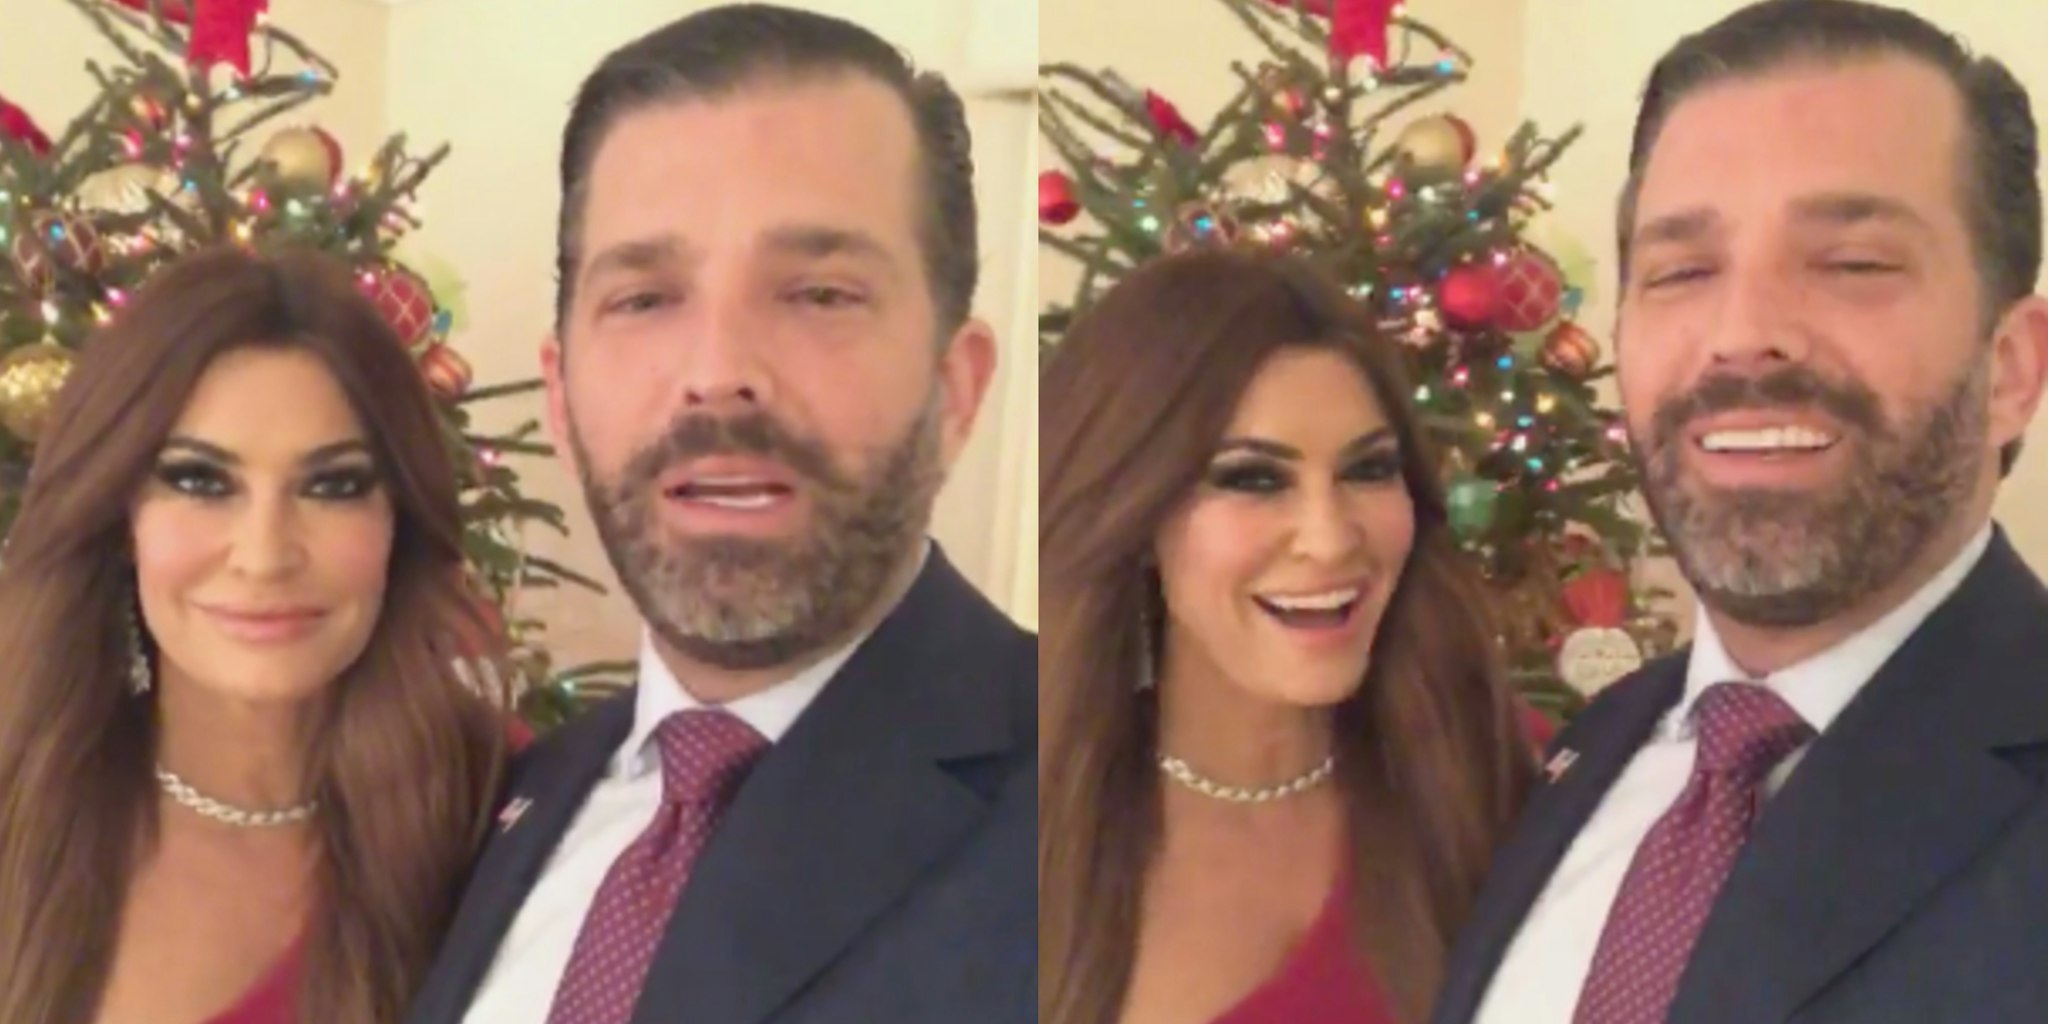 ‘He just humiliated her’: People think Trump Jr. insults girlfriend Kimberly in Christmas video